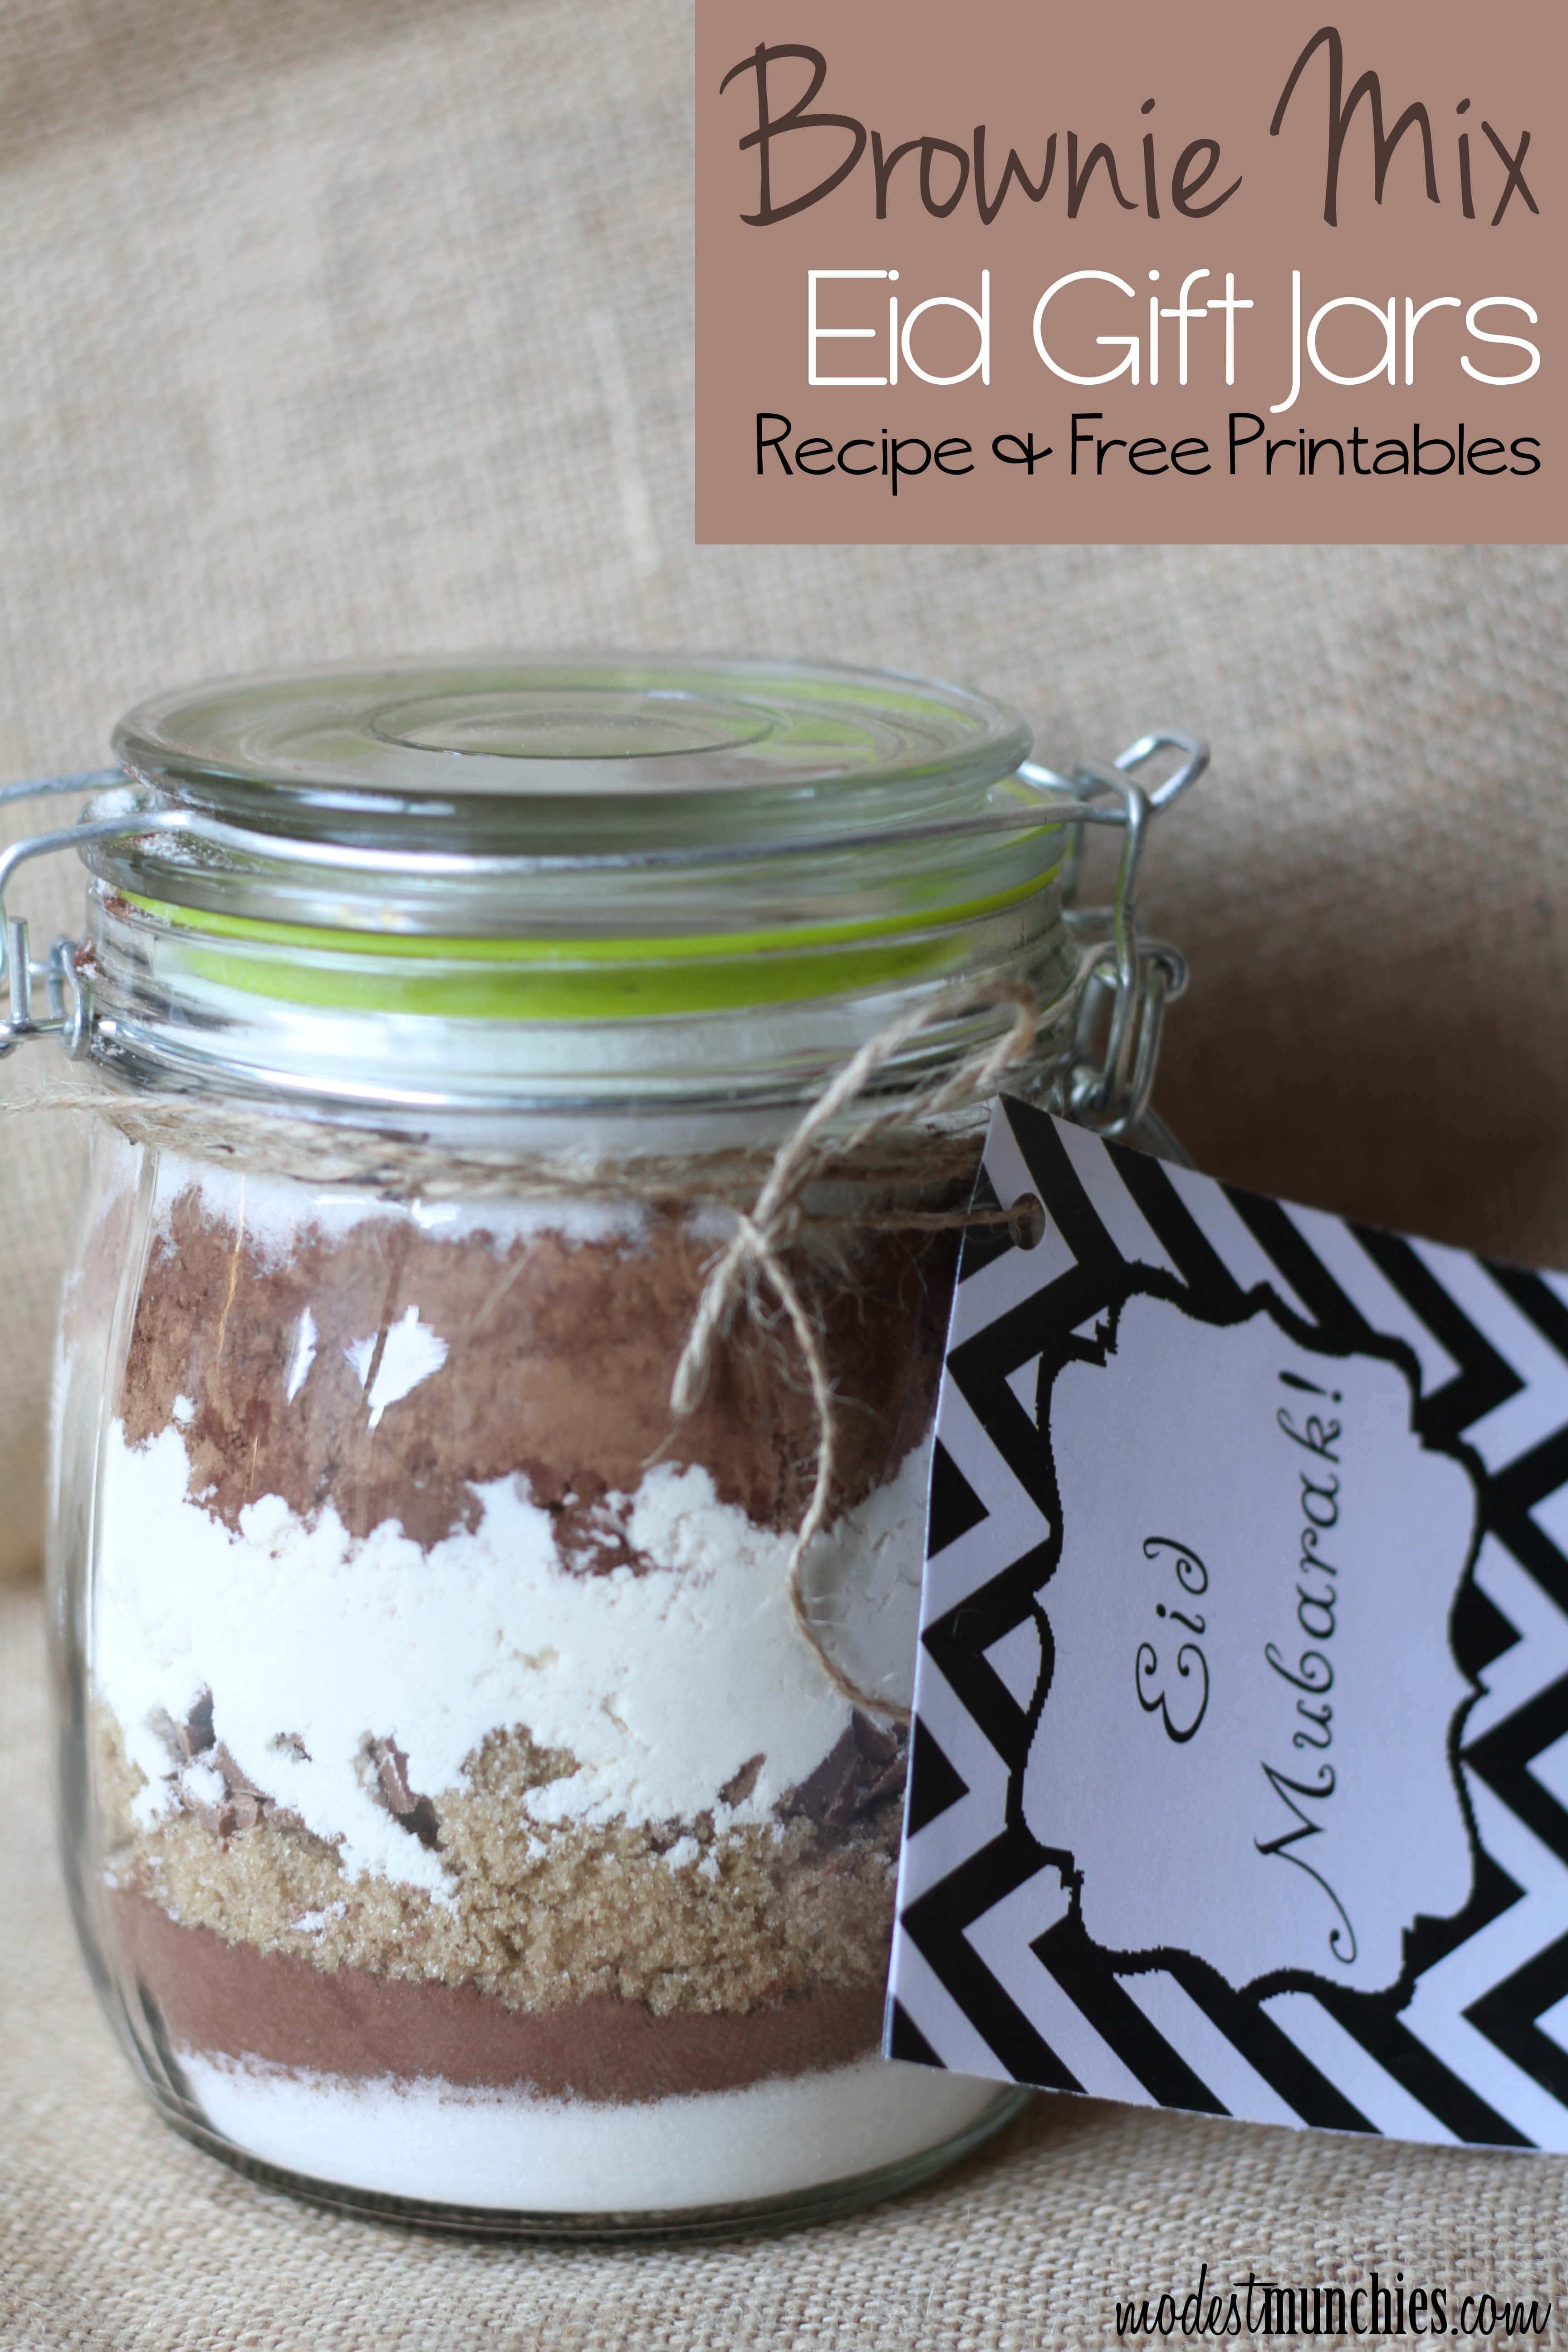 Browniw Mix Eid Gift Jard with Recipe and Free Printables